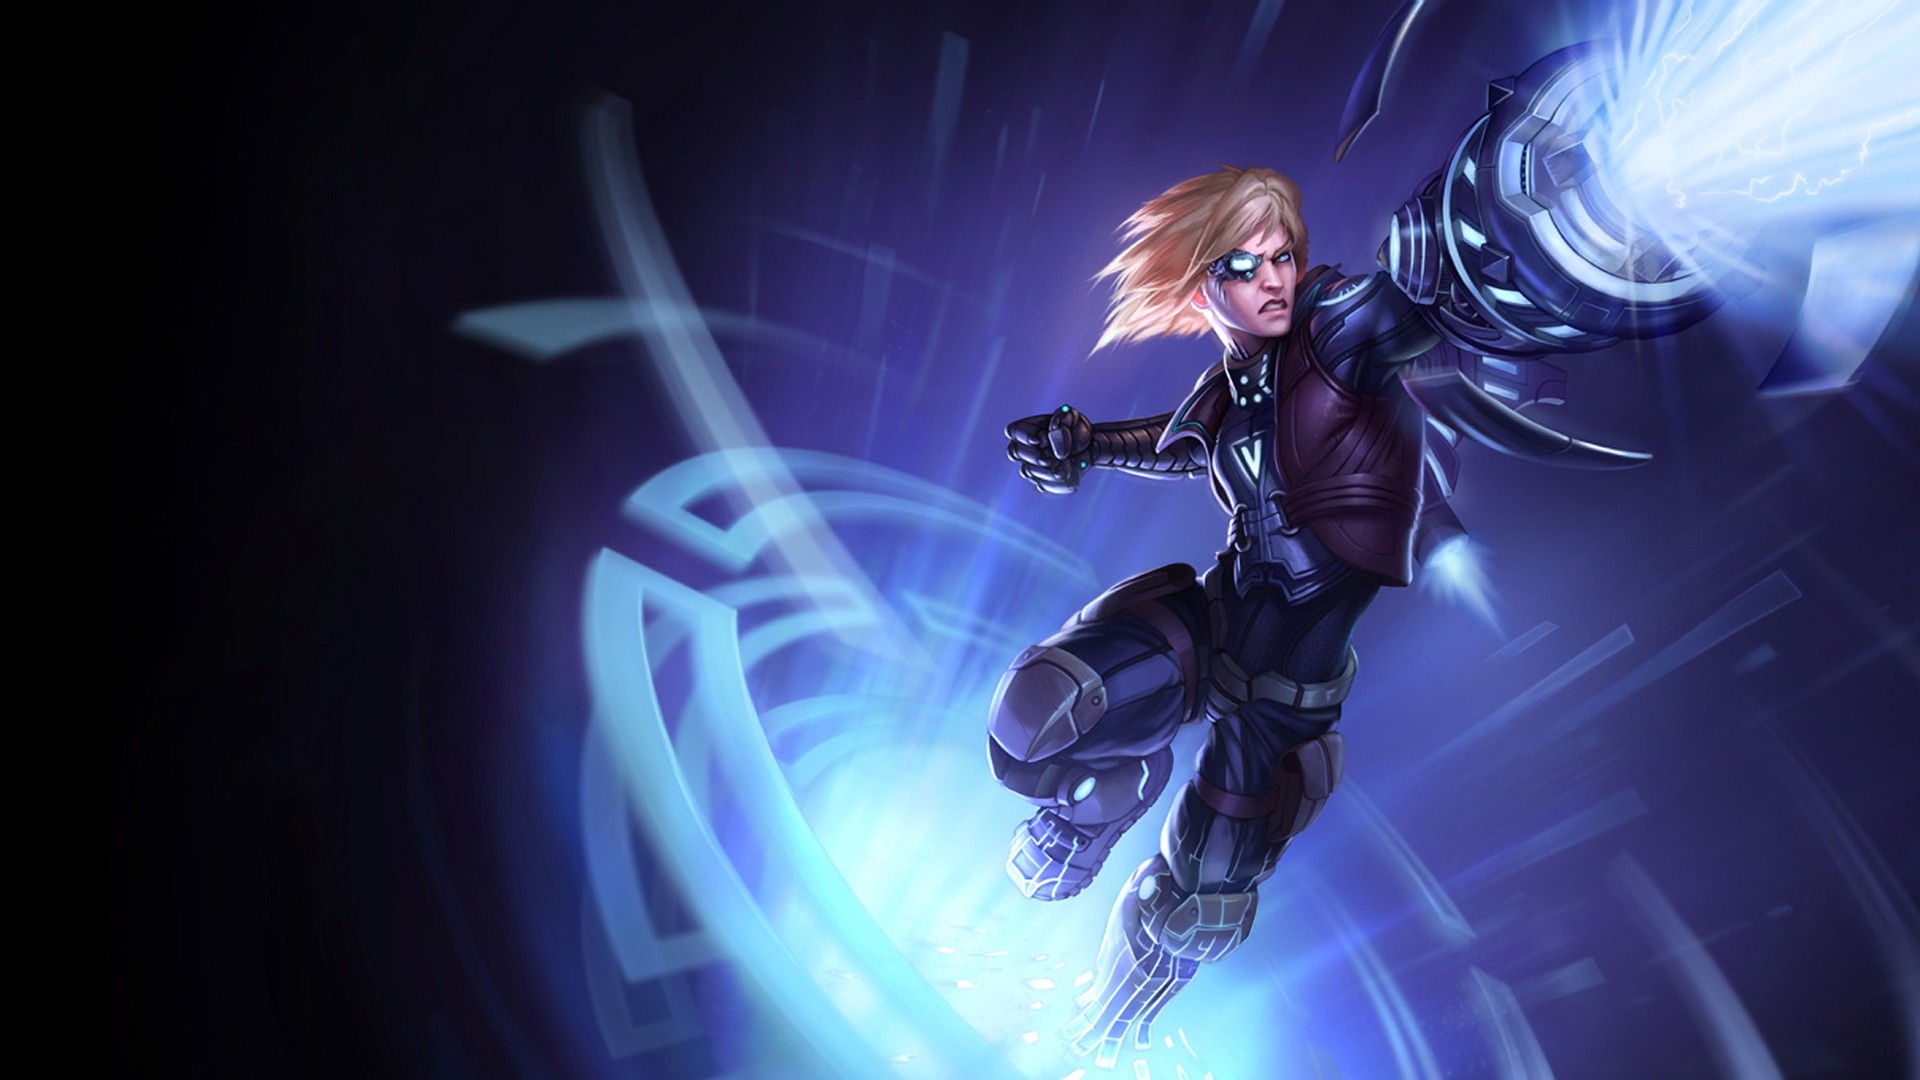 General 1920x1080 League of Legends PC gaming eyepatches Ezreal (League Of Legends)